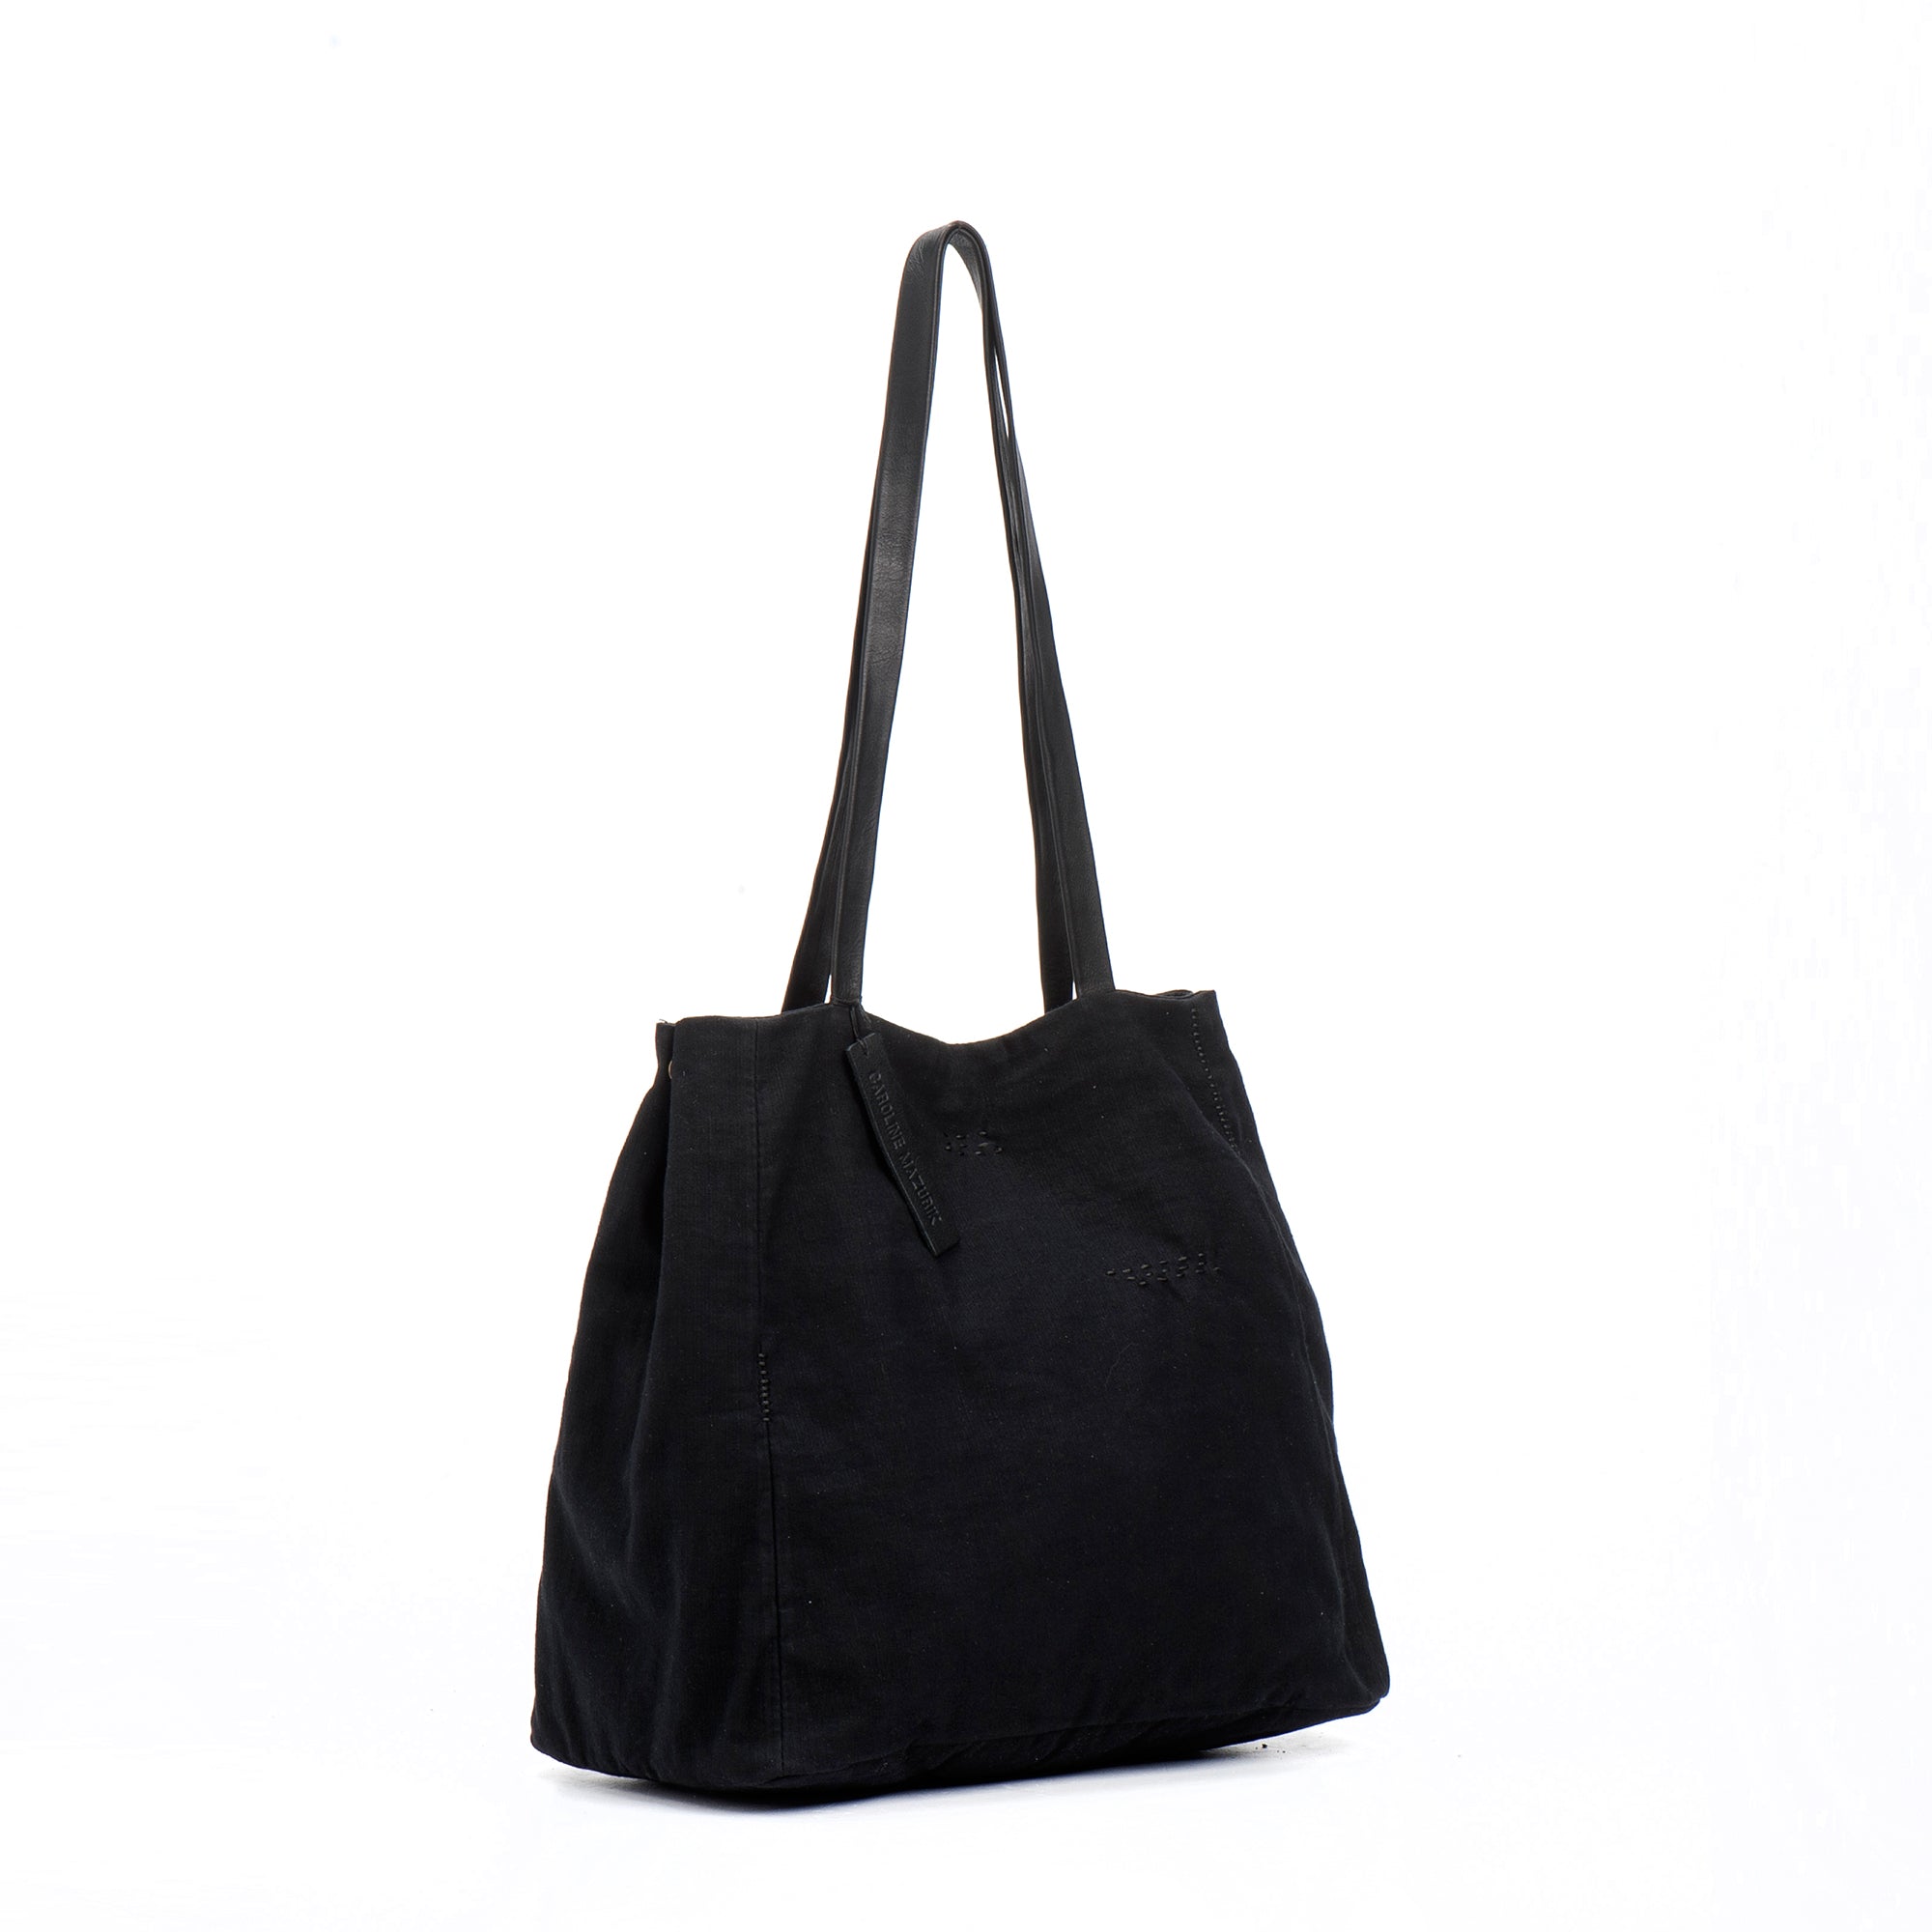 Black Cotton Tote Bag With Leather handles Everyday Woman Bag